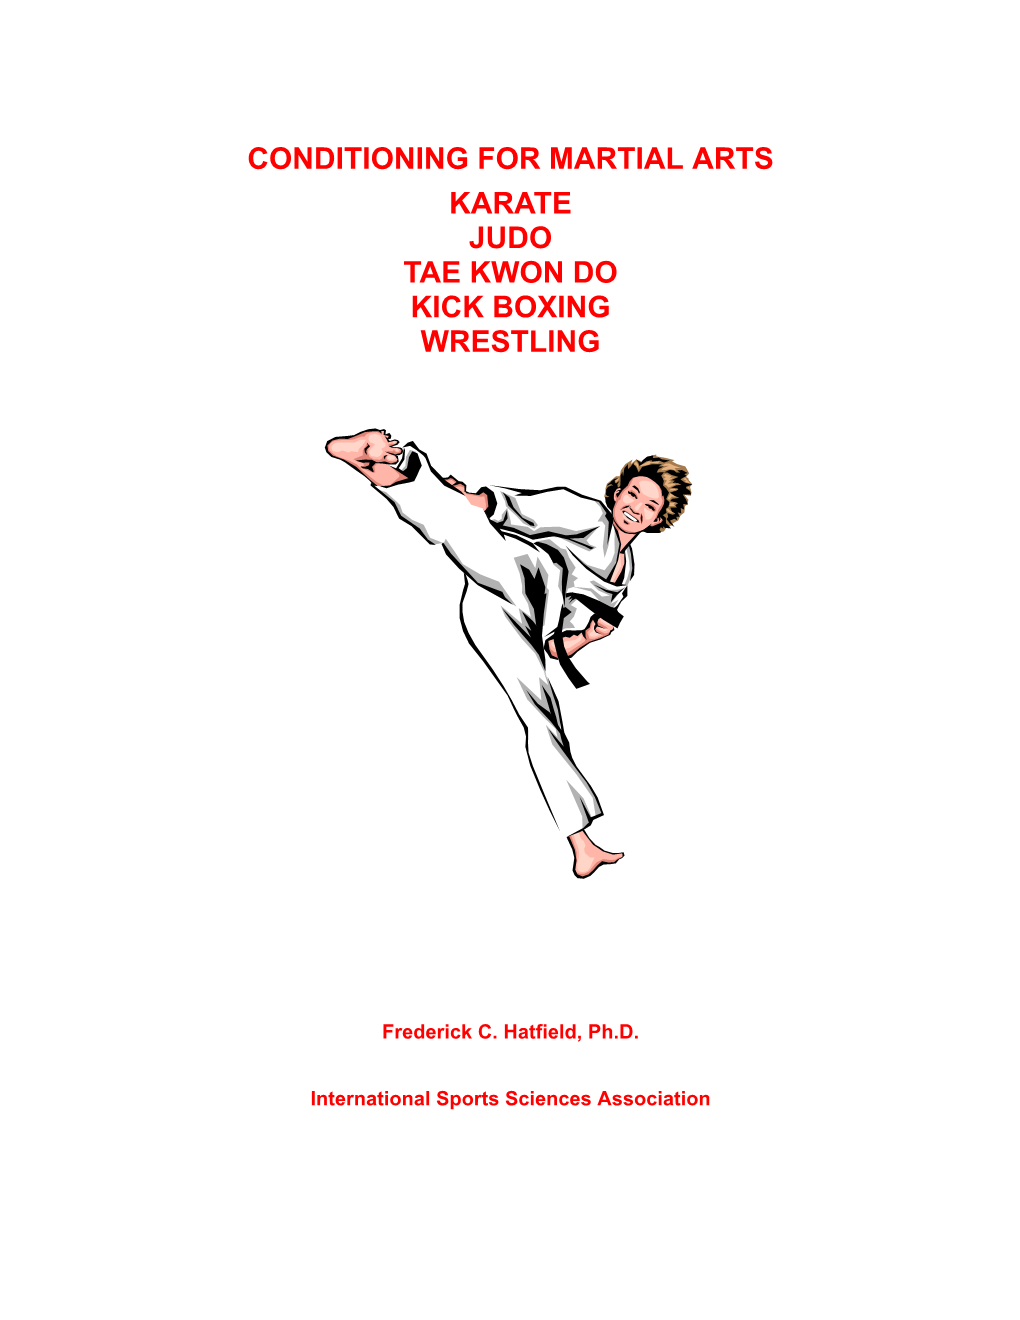 Physical Conditioning for Martial Arts